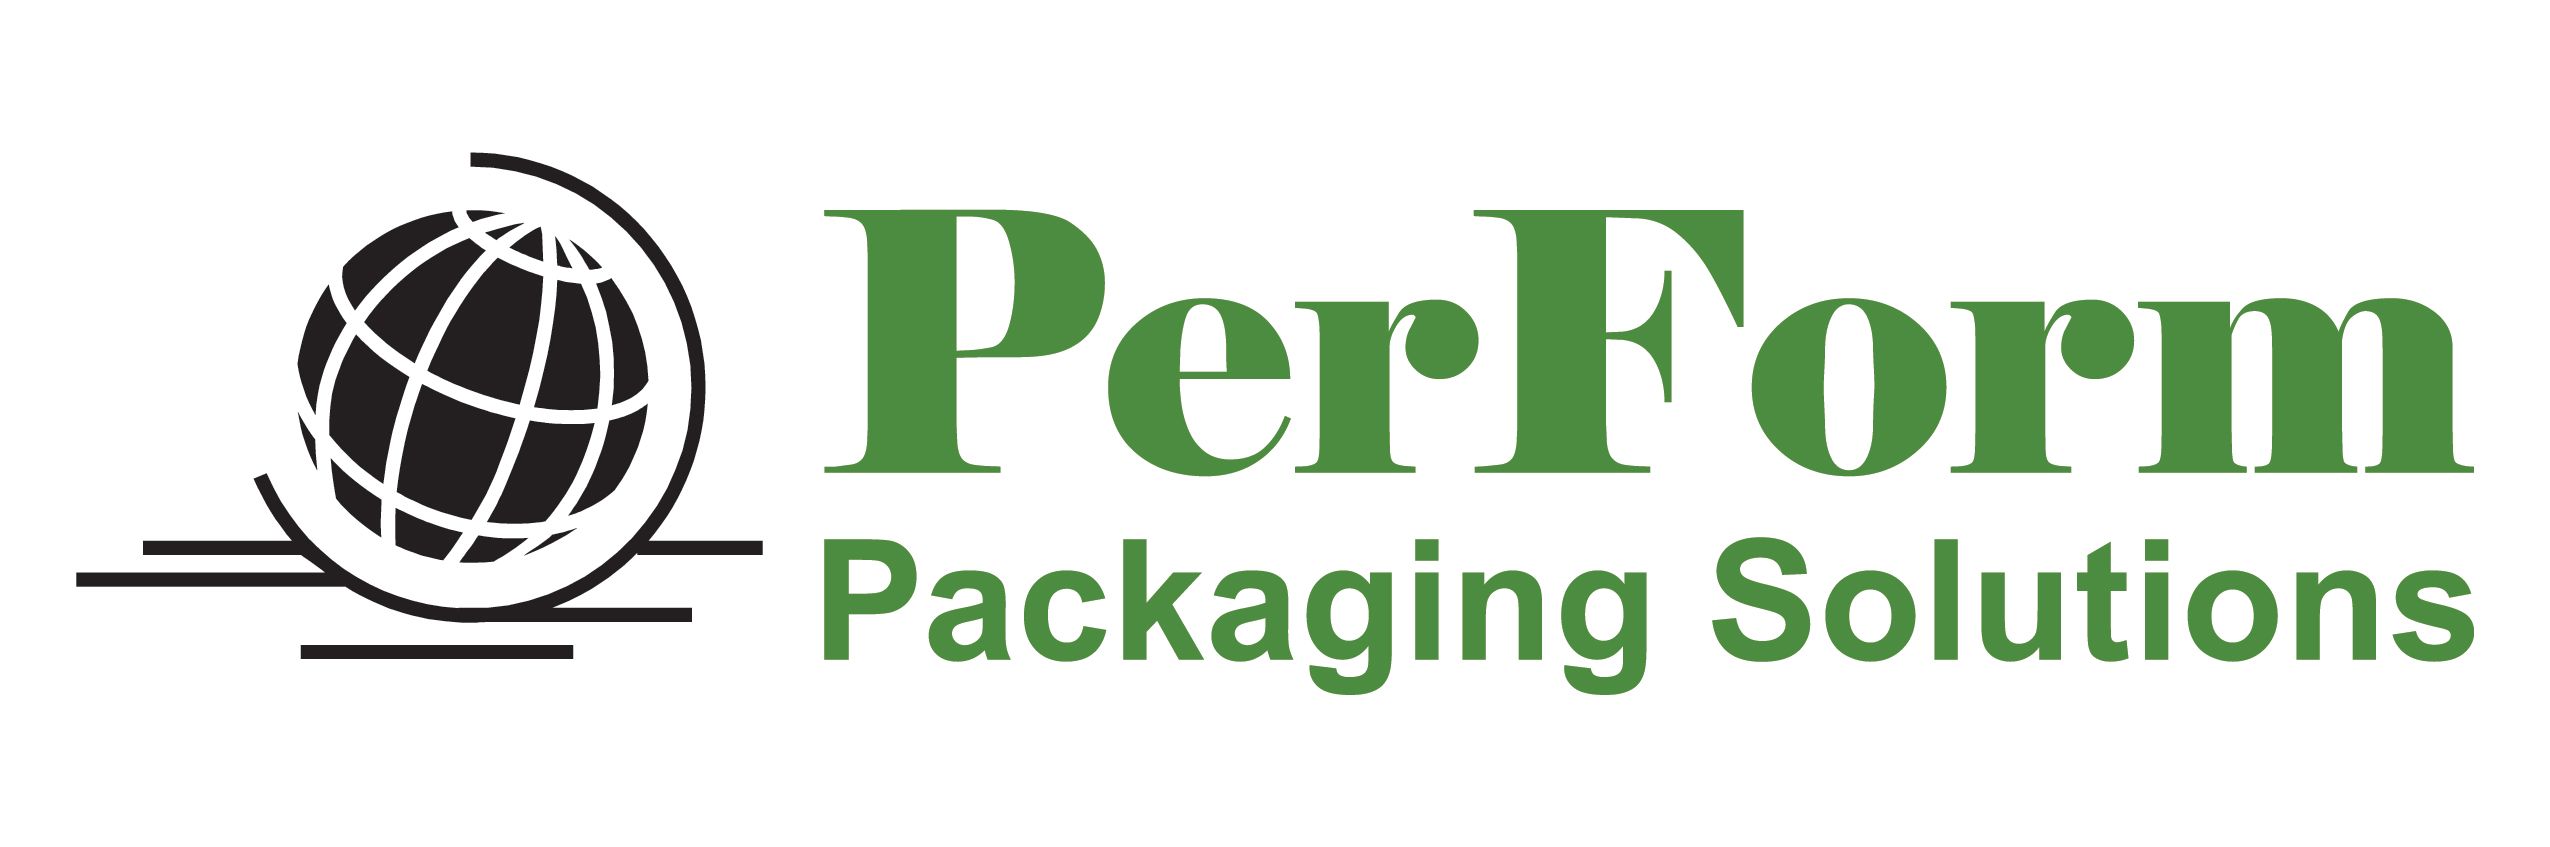 PerForm Packaging Solutions